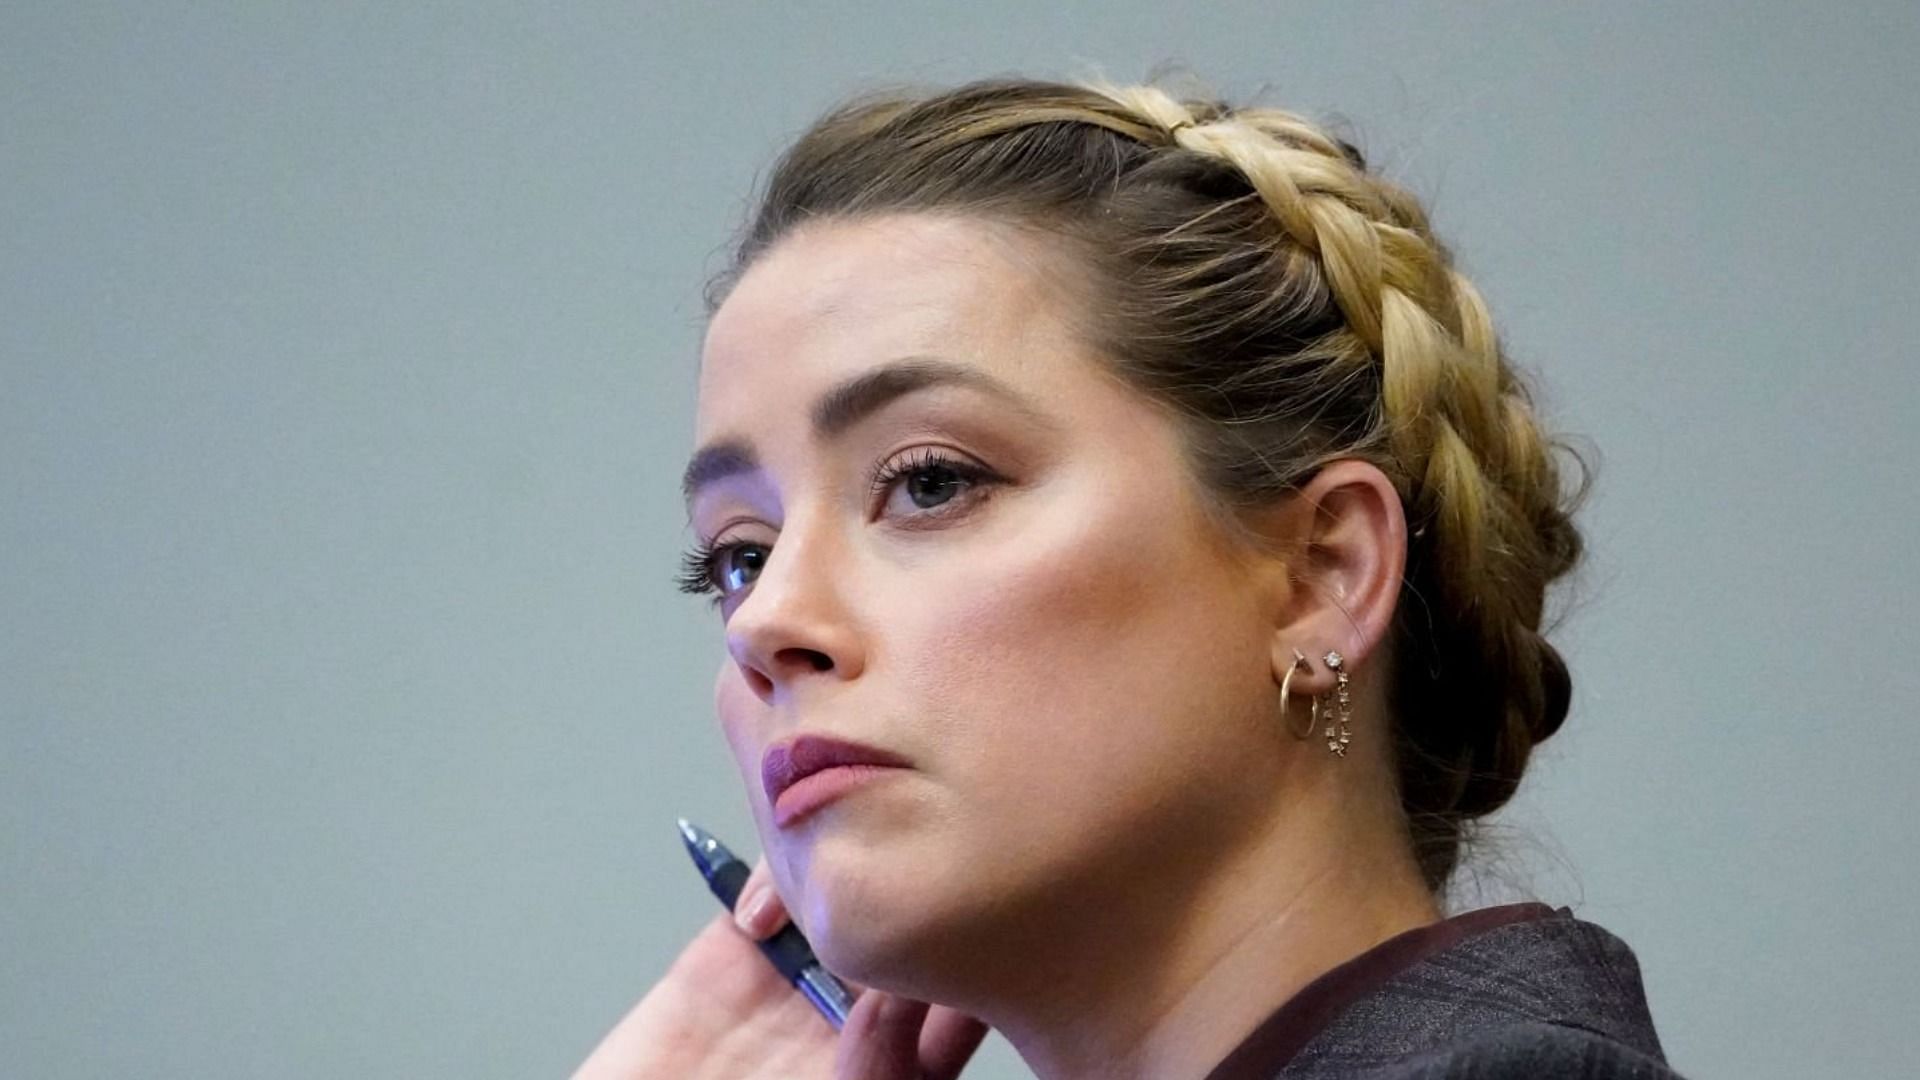 Amber Heard told Savannah Guthrie she stands by her testimony despite losing defamation trial against Johnny Depp (Image via Getty Images)